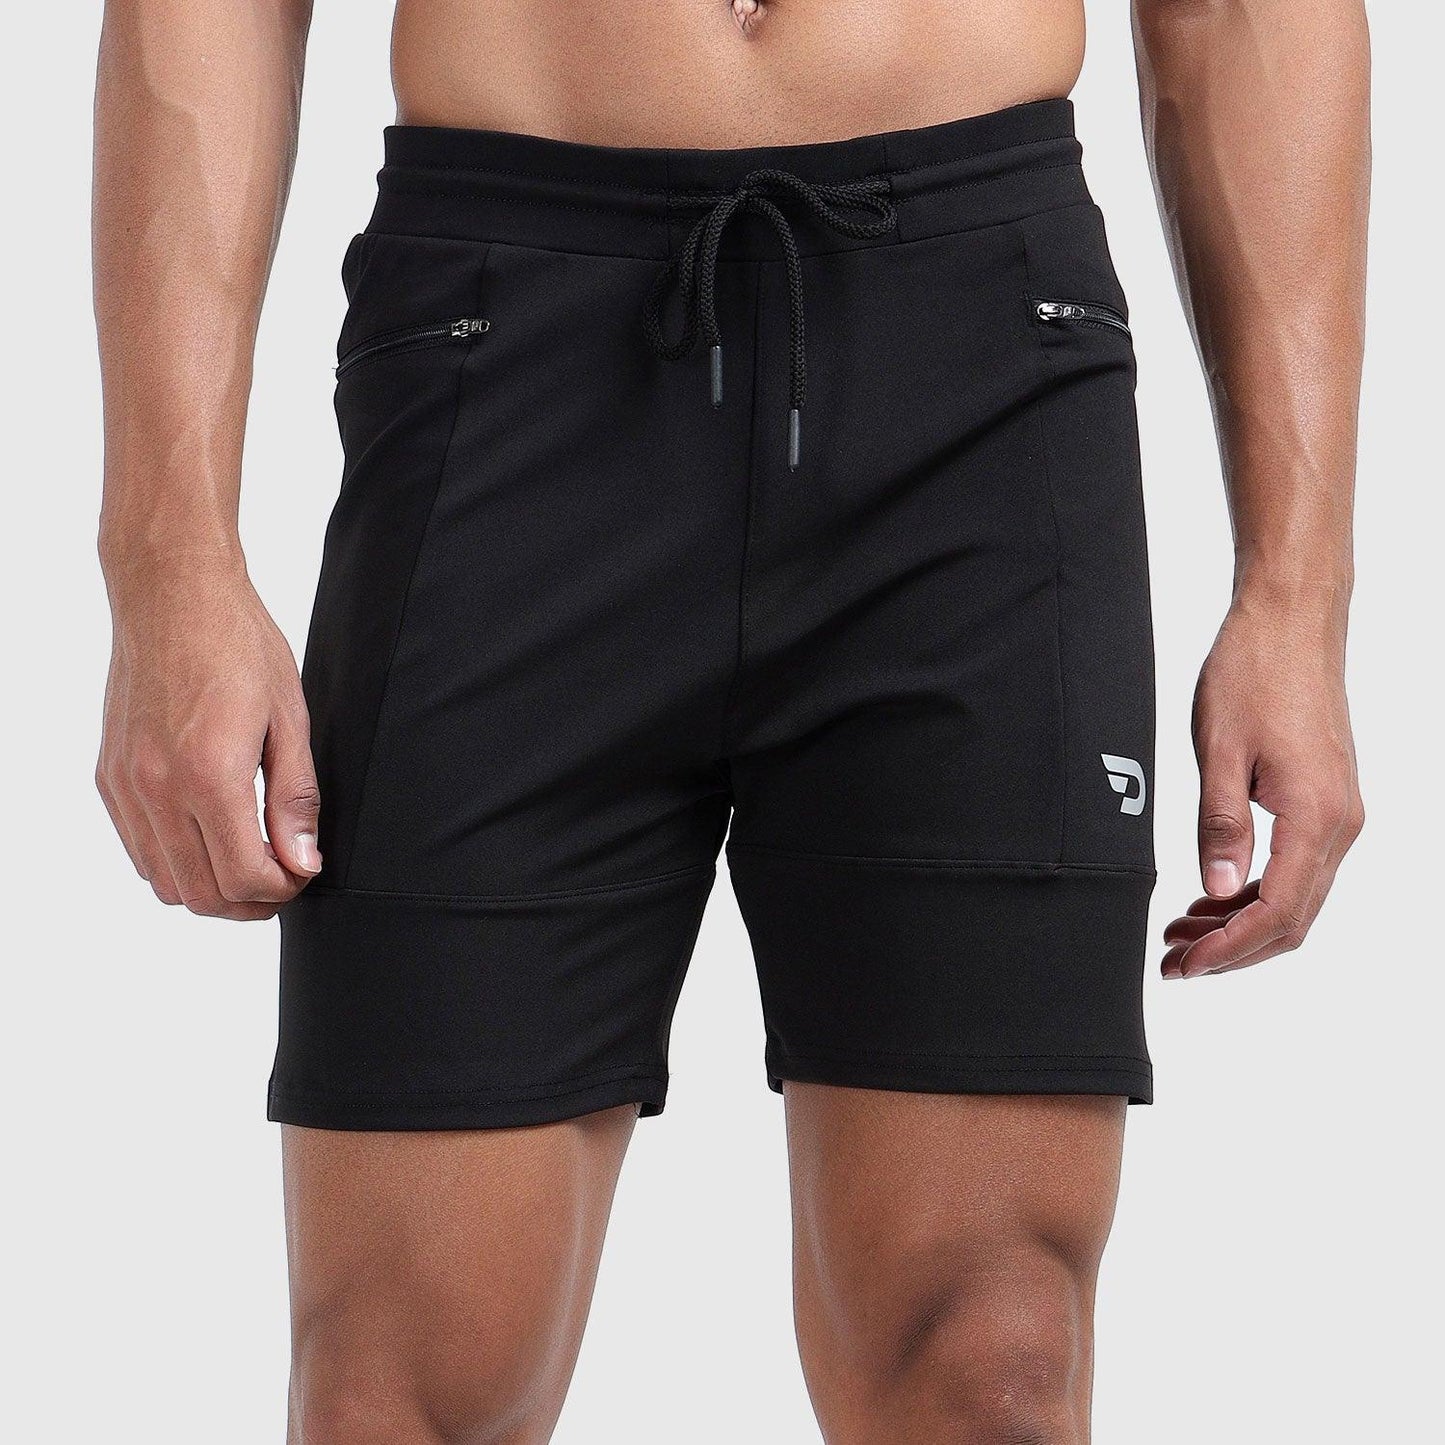 Denmonk's fashionable Power Shorts black shorts for men will boost your level of gym fitness.